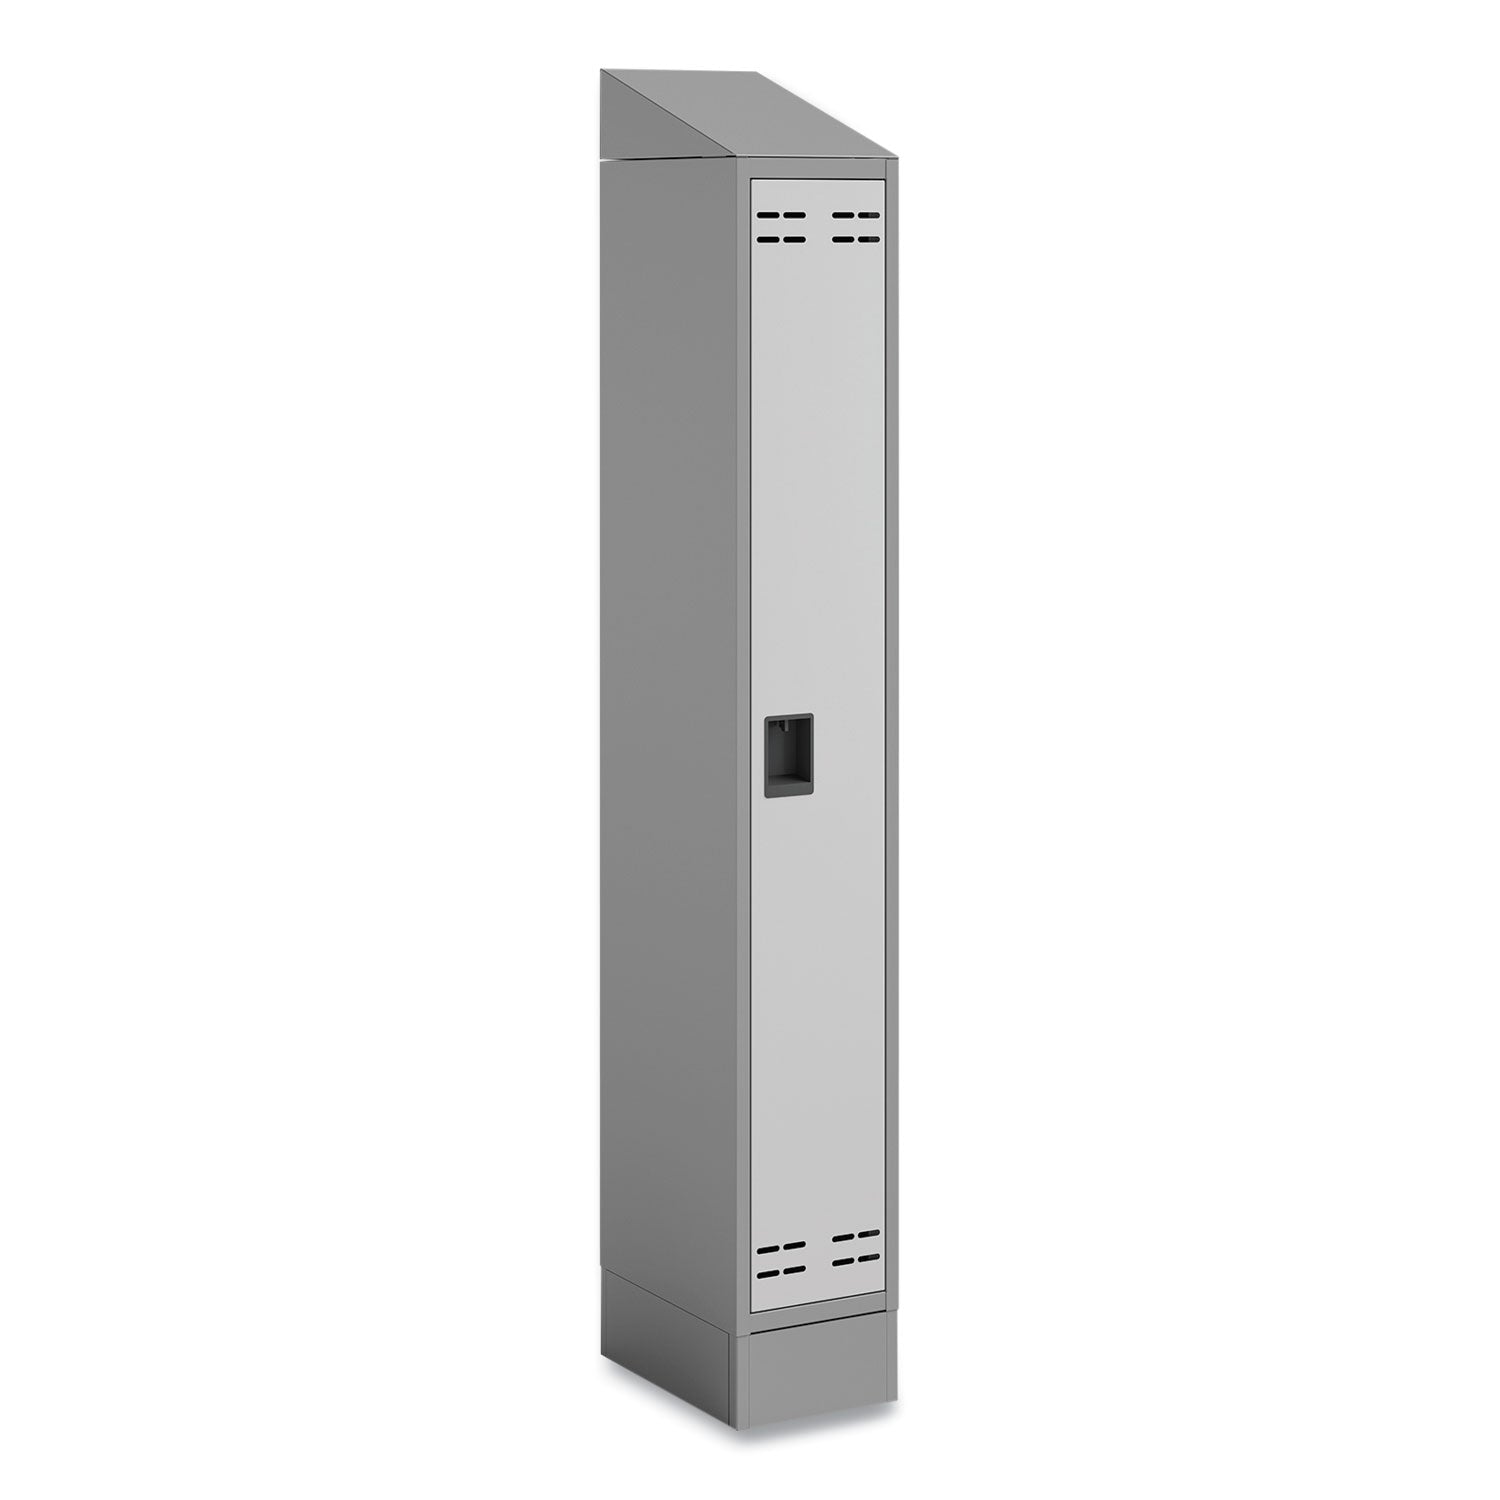 single-continuous-metal-locker-base-addition-117w-x-16d-x-575h-gray-ships-in-1-3-business-days_saf5519gr - 3